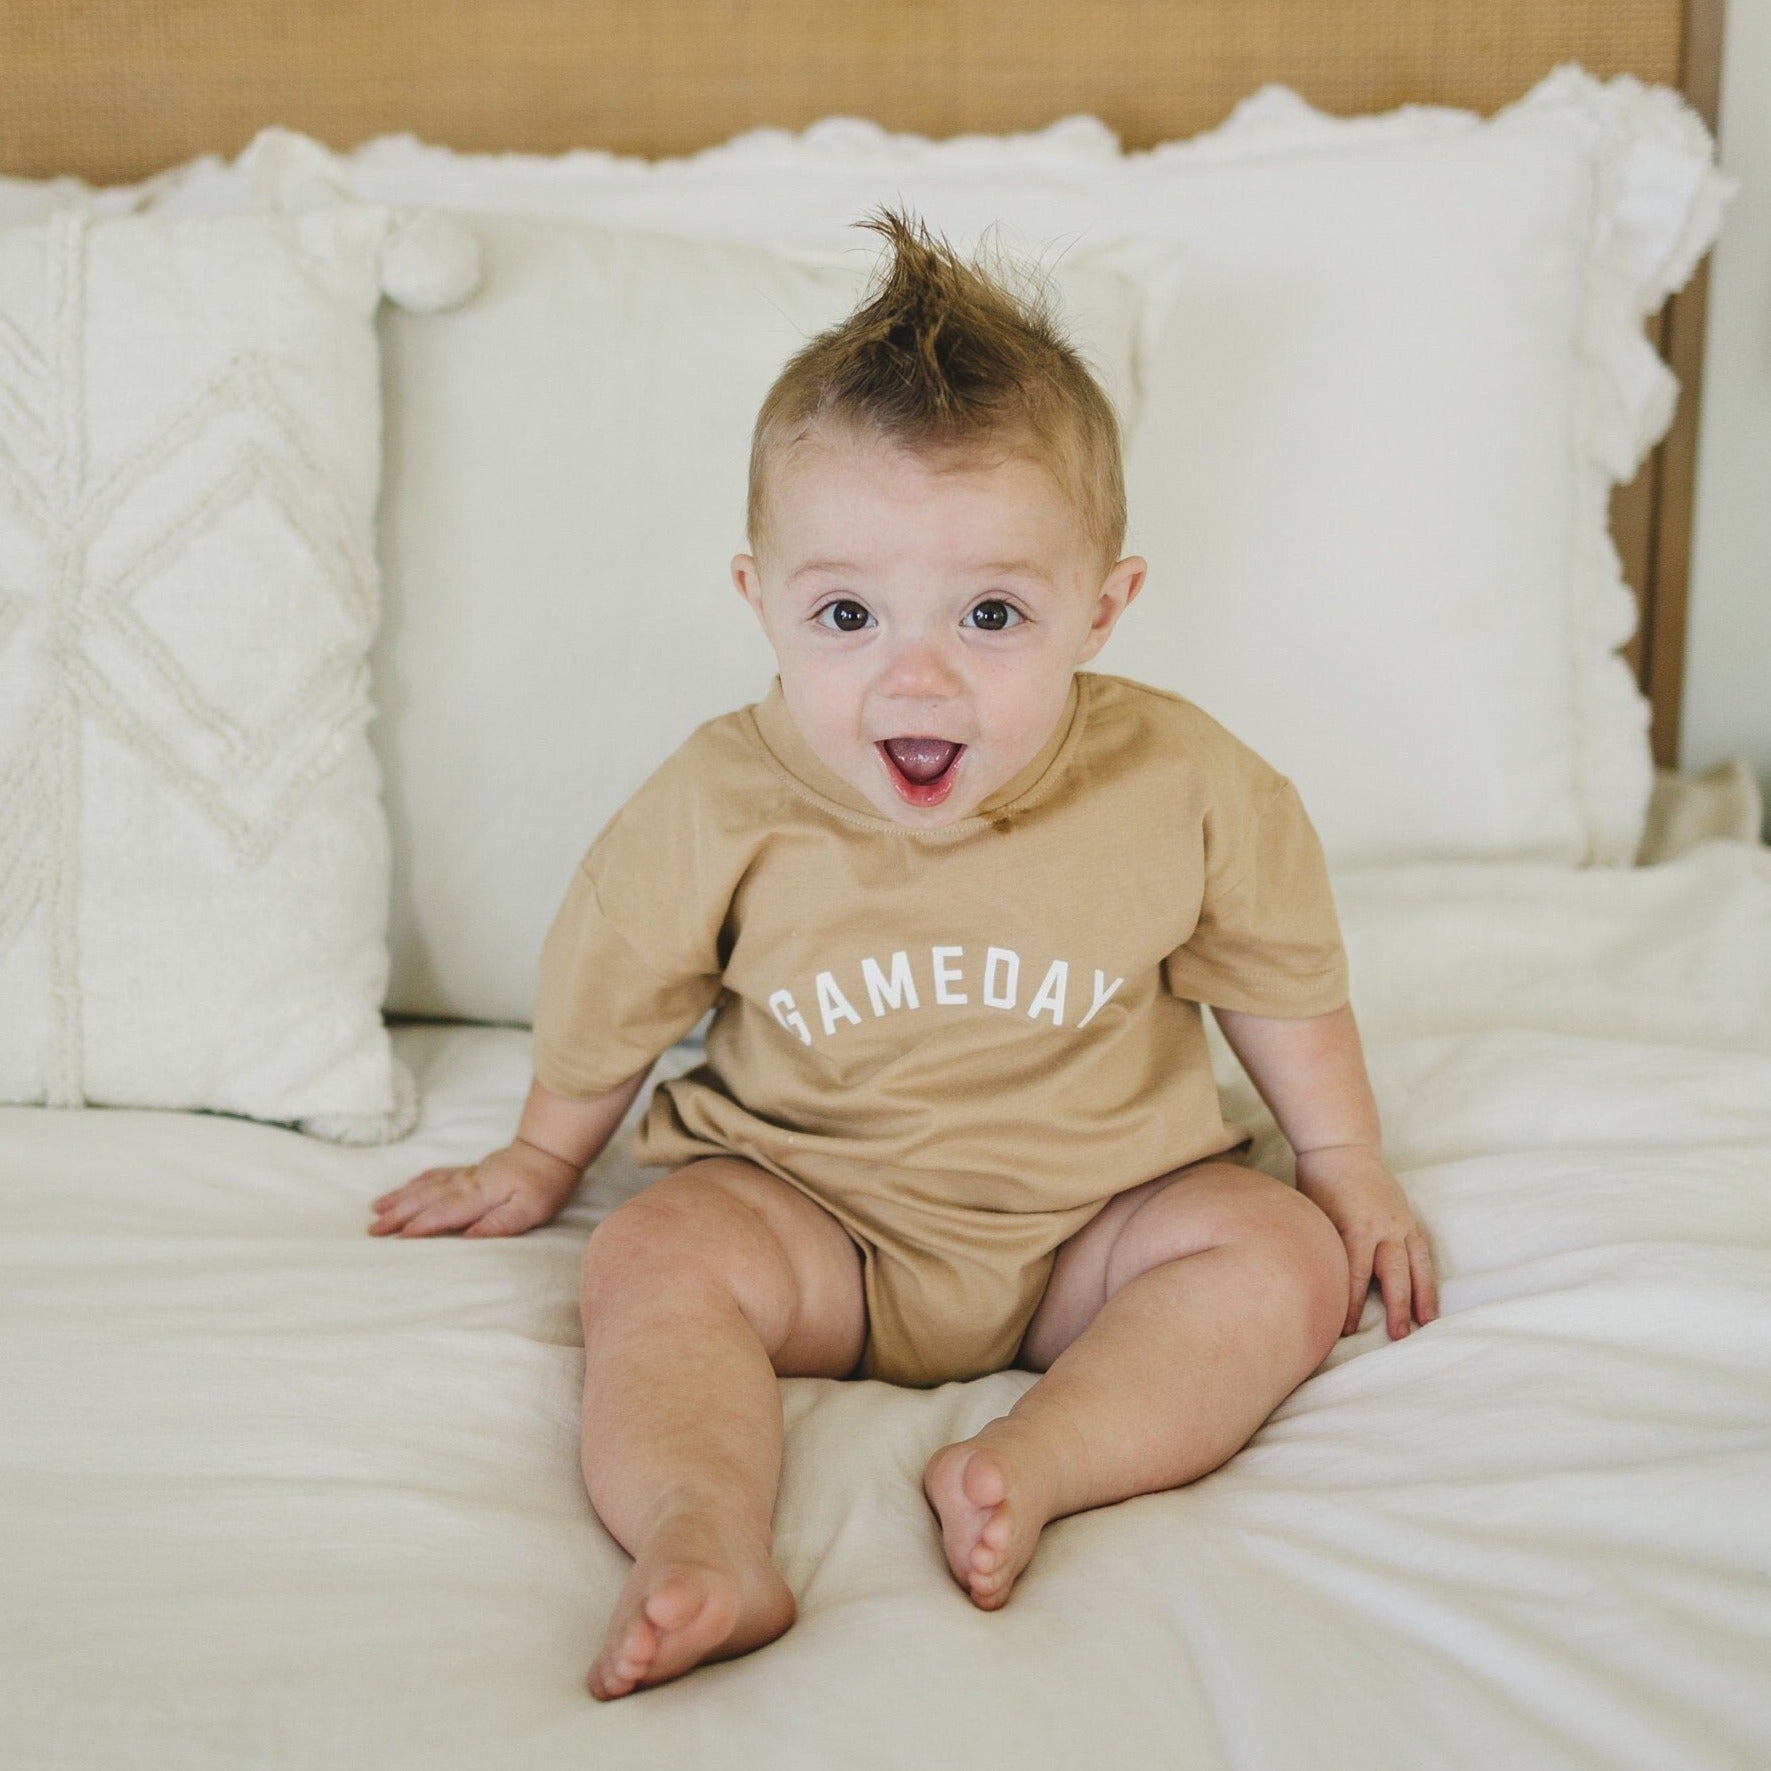 Gameday Organic Cotton T-Shirt Romper - more colors